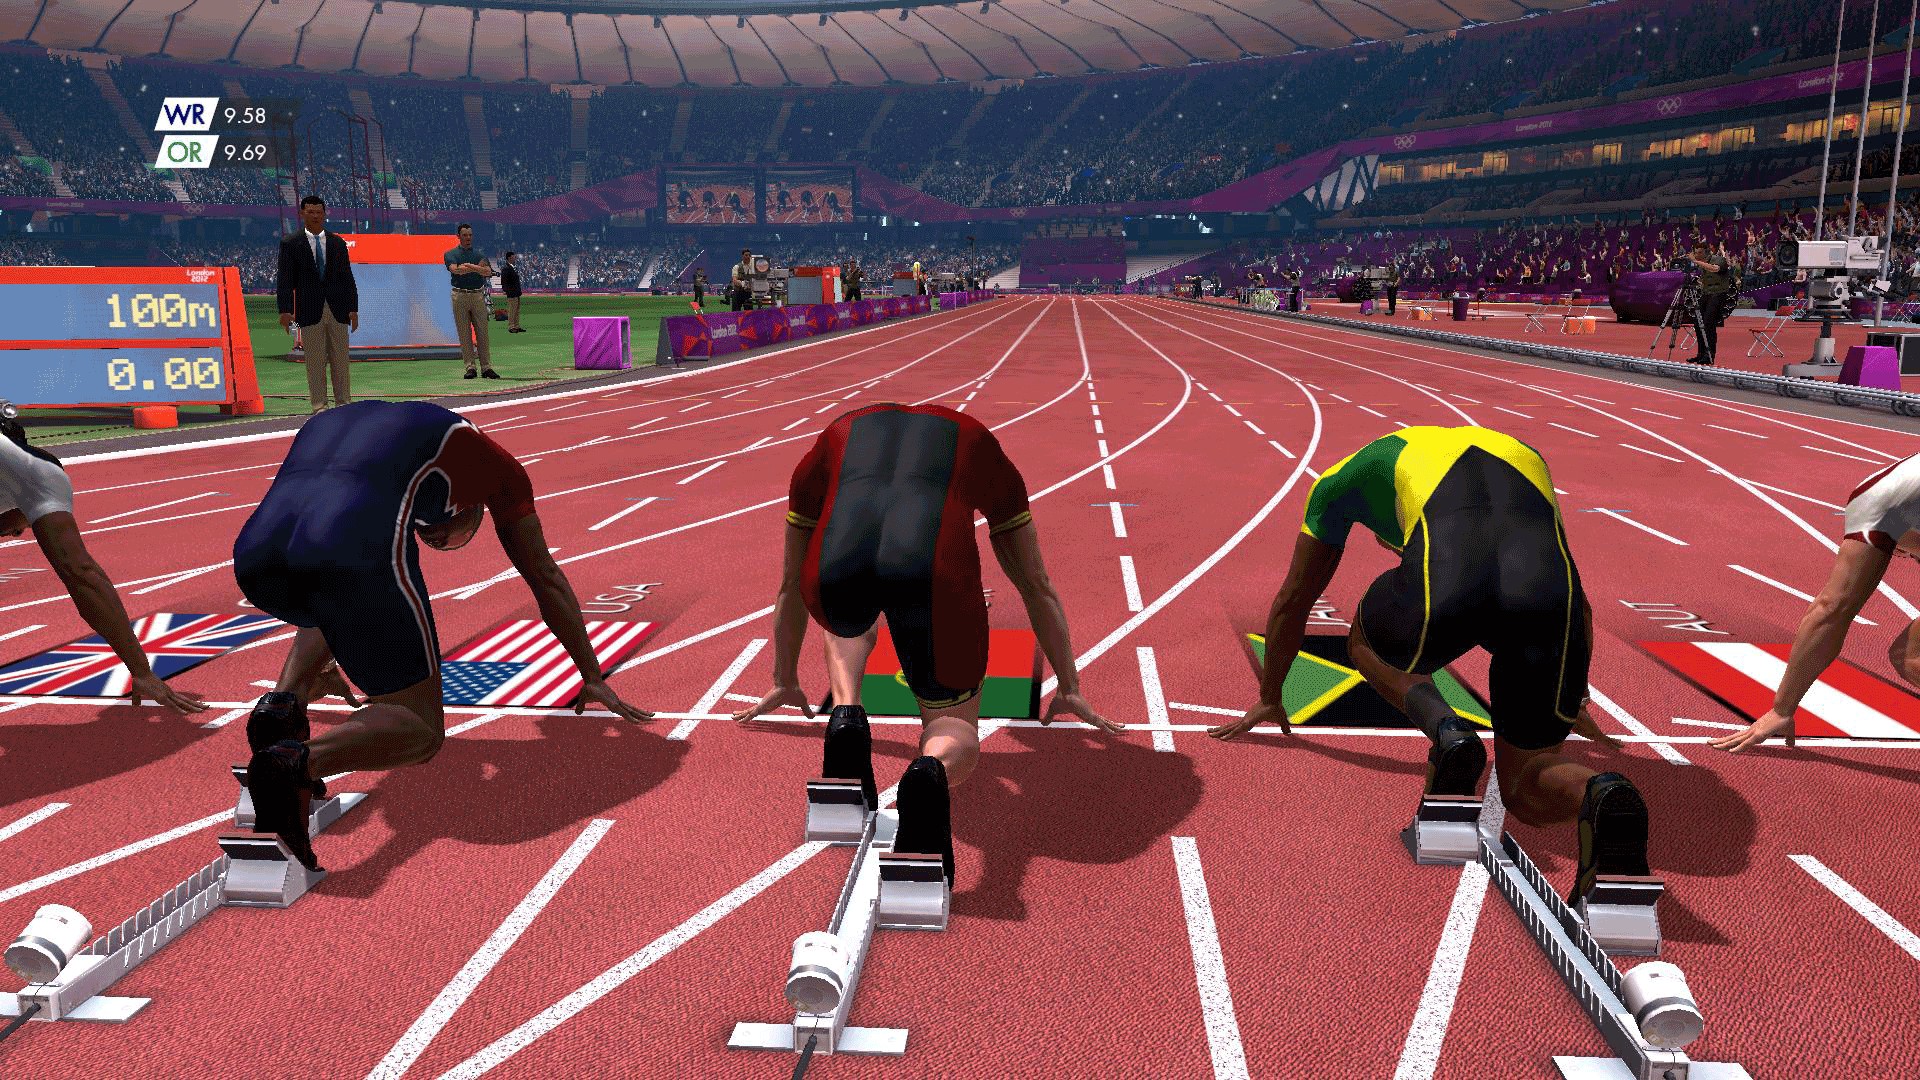 london 2012 olympic game crack download